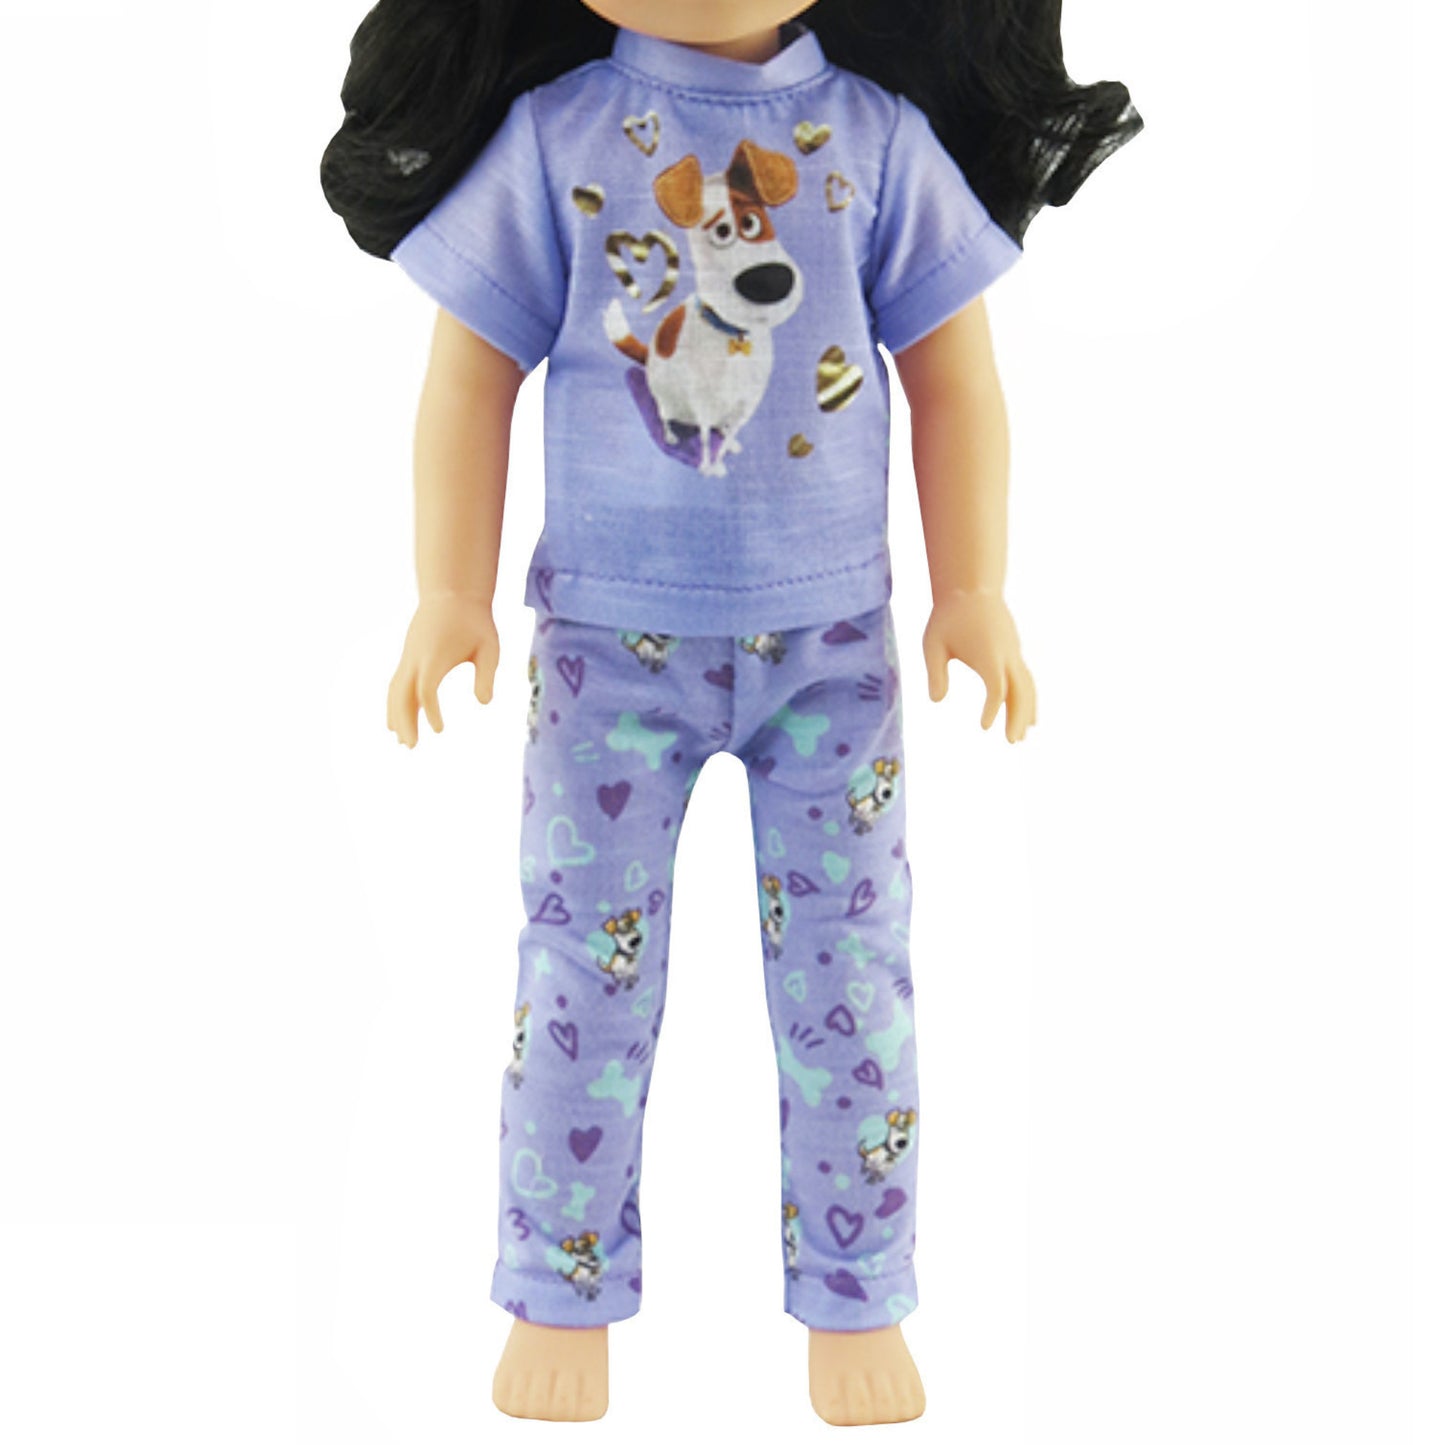 Purple Pets Inspired 2 Pc Pajamas for 14 1/2-inch dolls with doll